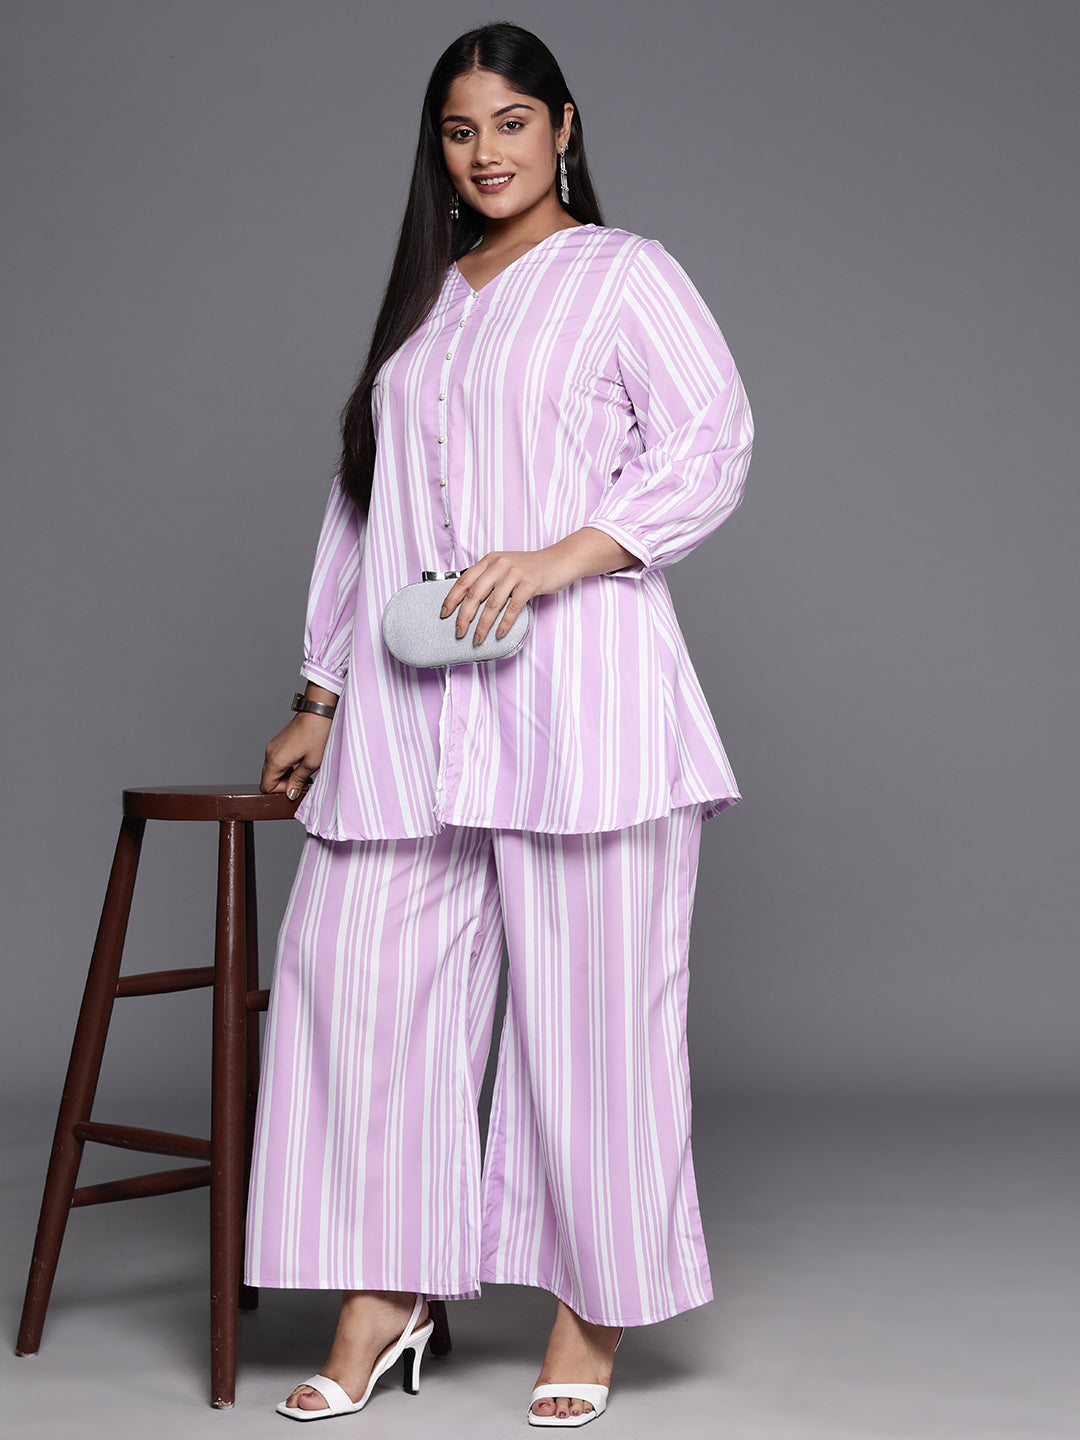 Women's Traditional Wear Co-Ods - A Plus By Ahalyaa